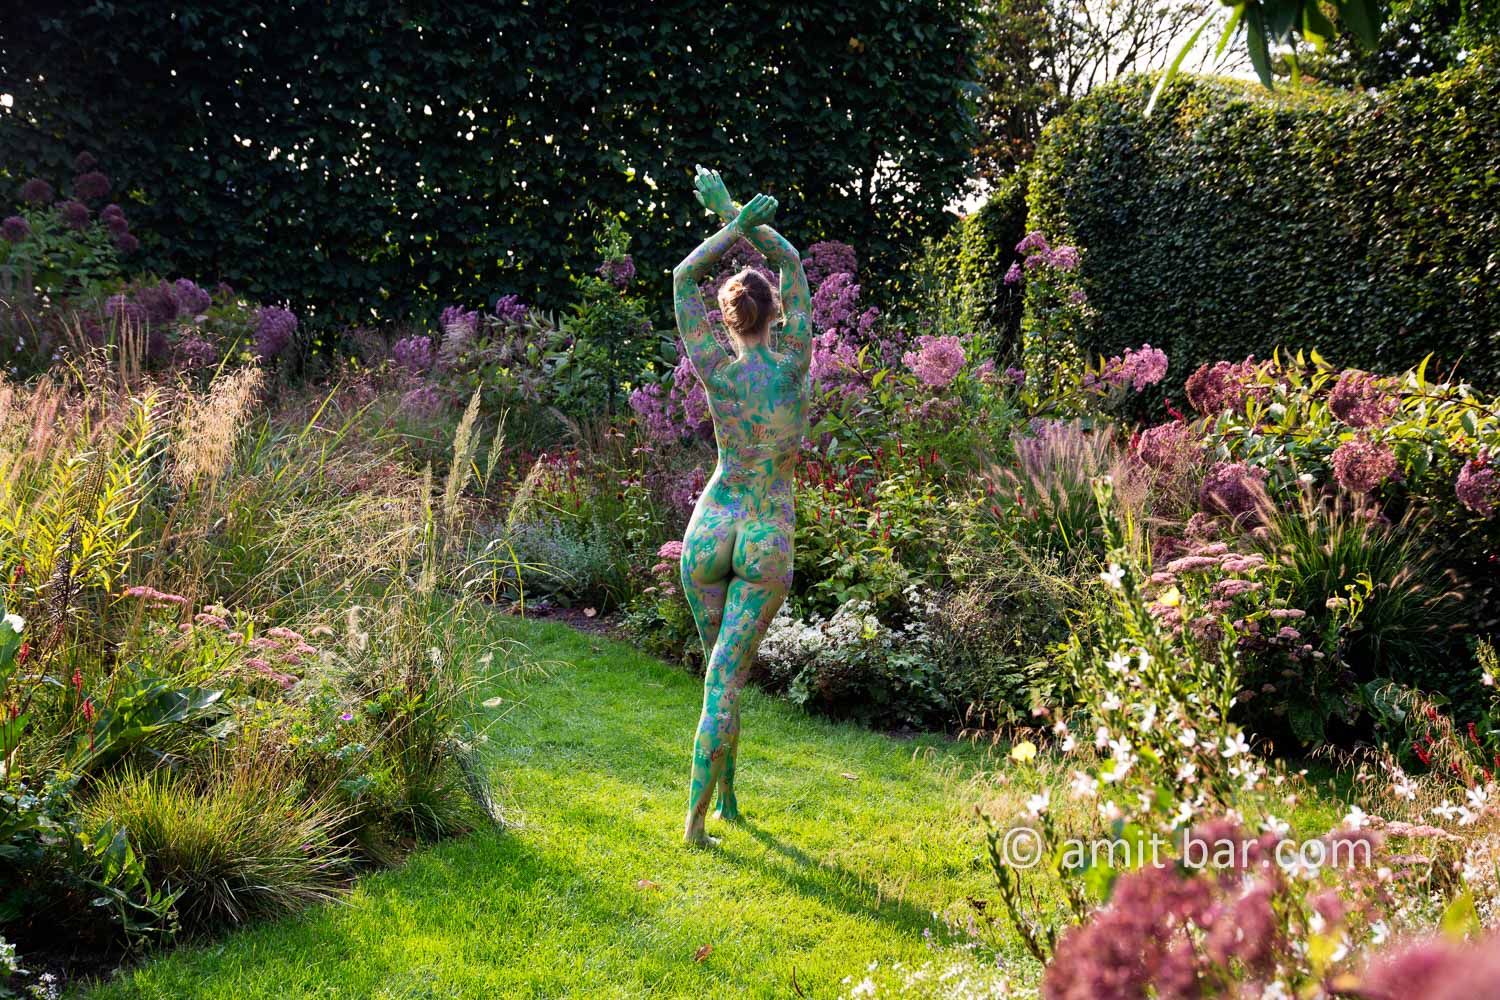 Garden flowers I: A body painted model is walking on a cloudy afternoon among the flowers of a beautiful garden in De Achterhoek, The Netherlands.